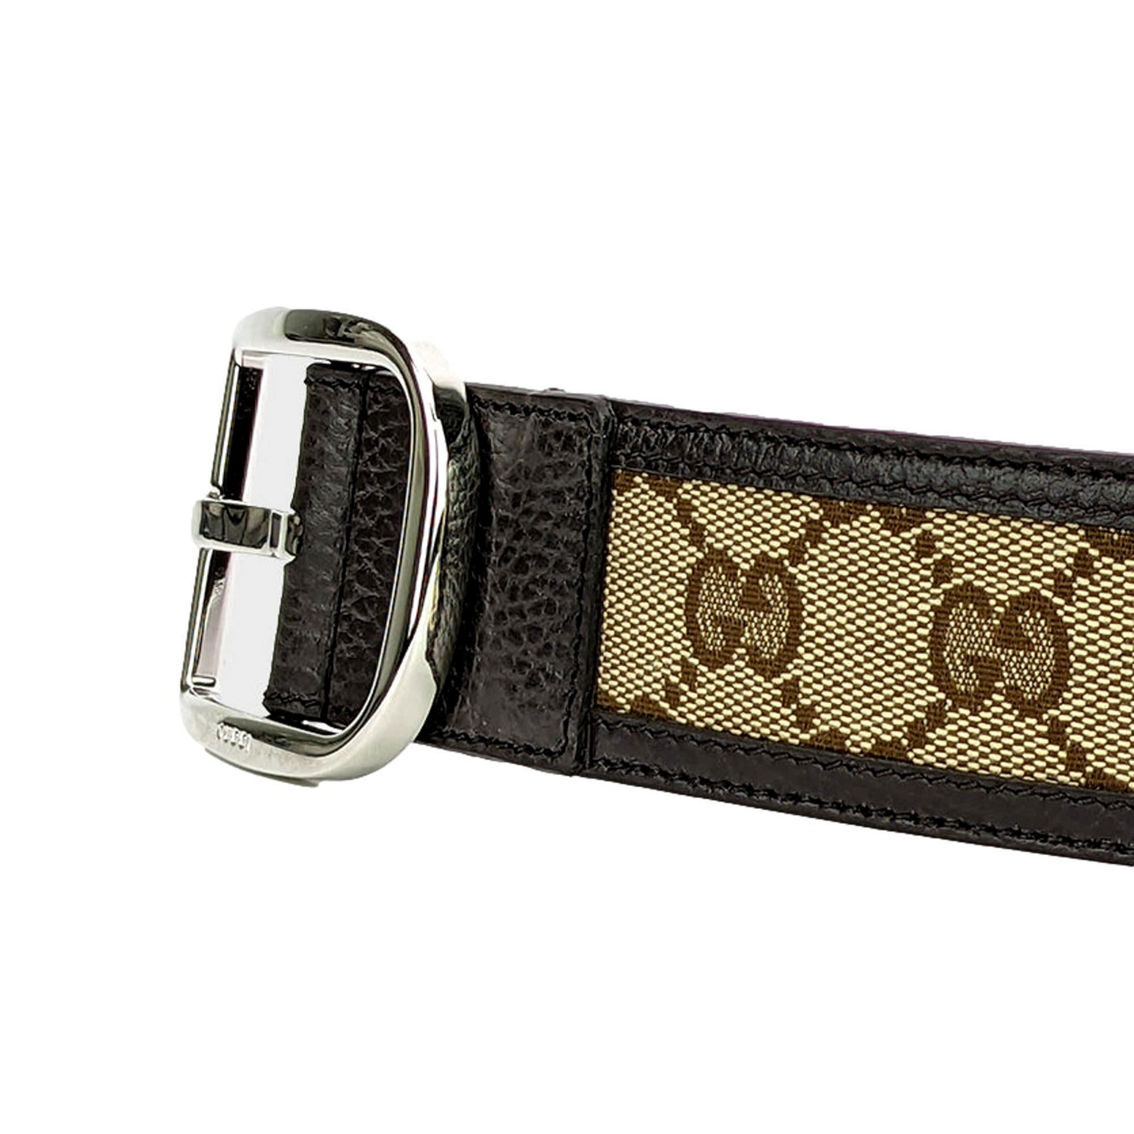 Gucci Mens Guccisssima Brown and Beige Canvas Leather Trim Belt Size 100/40 (New) - Image 5 of 5